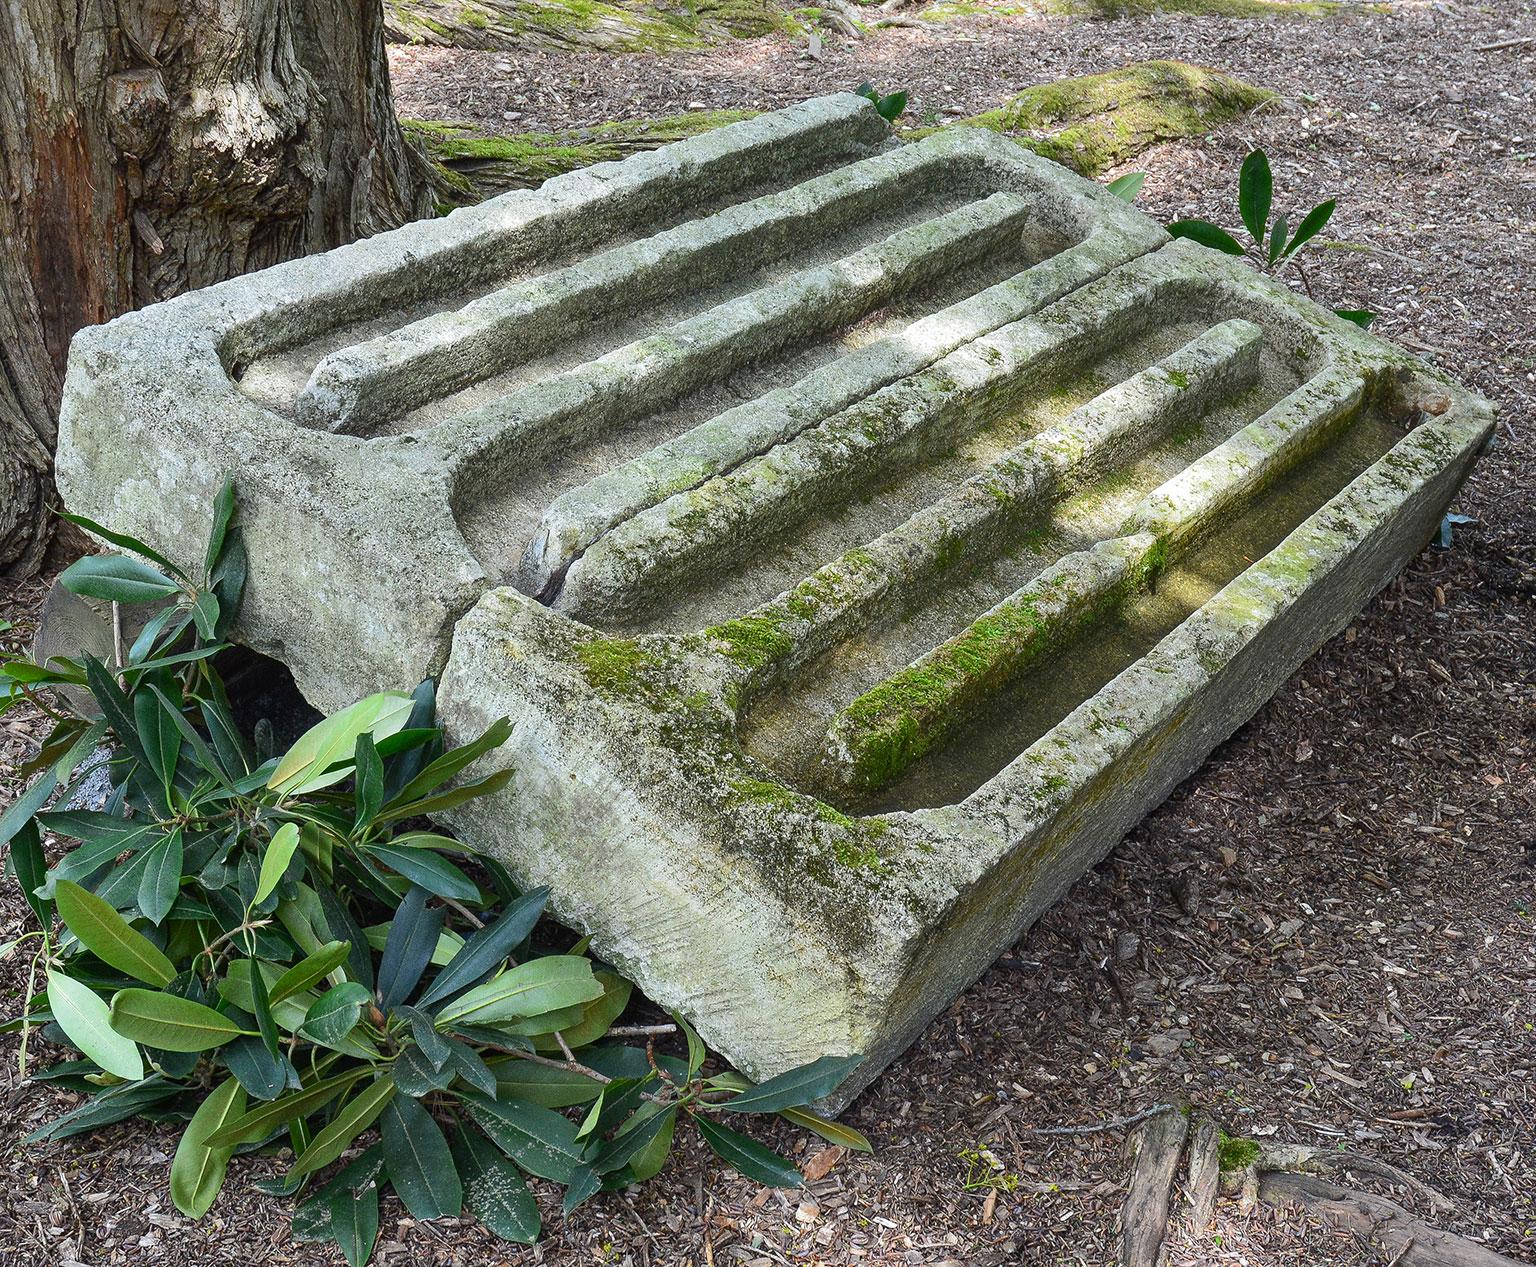 A rare carved limestone spirit cooler with serpentine channels, in two parts.

Used in the Cognac region of France as part of the distillery production of the famous brandy that bears its name.
 